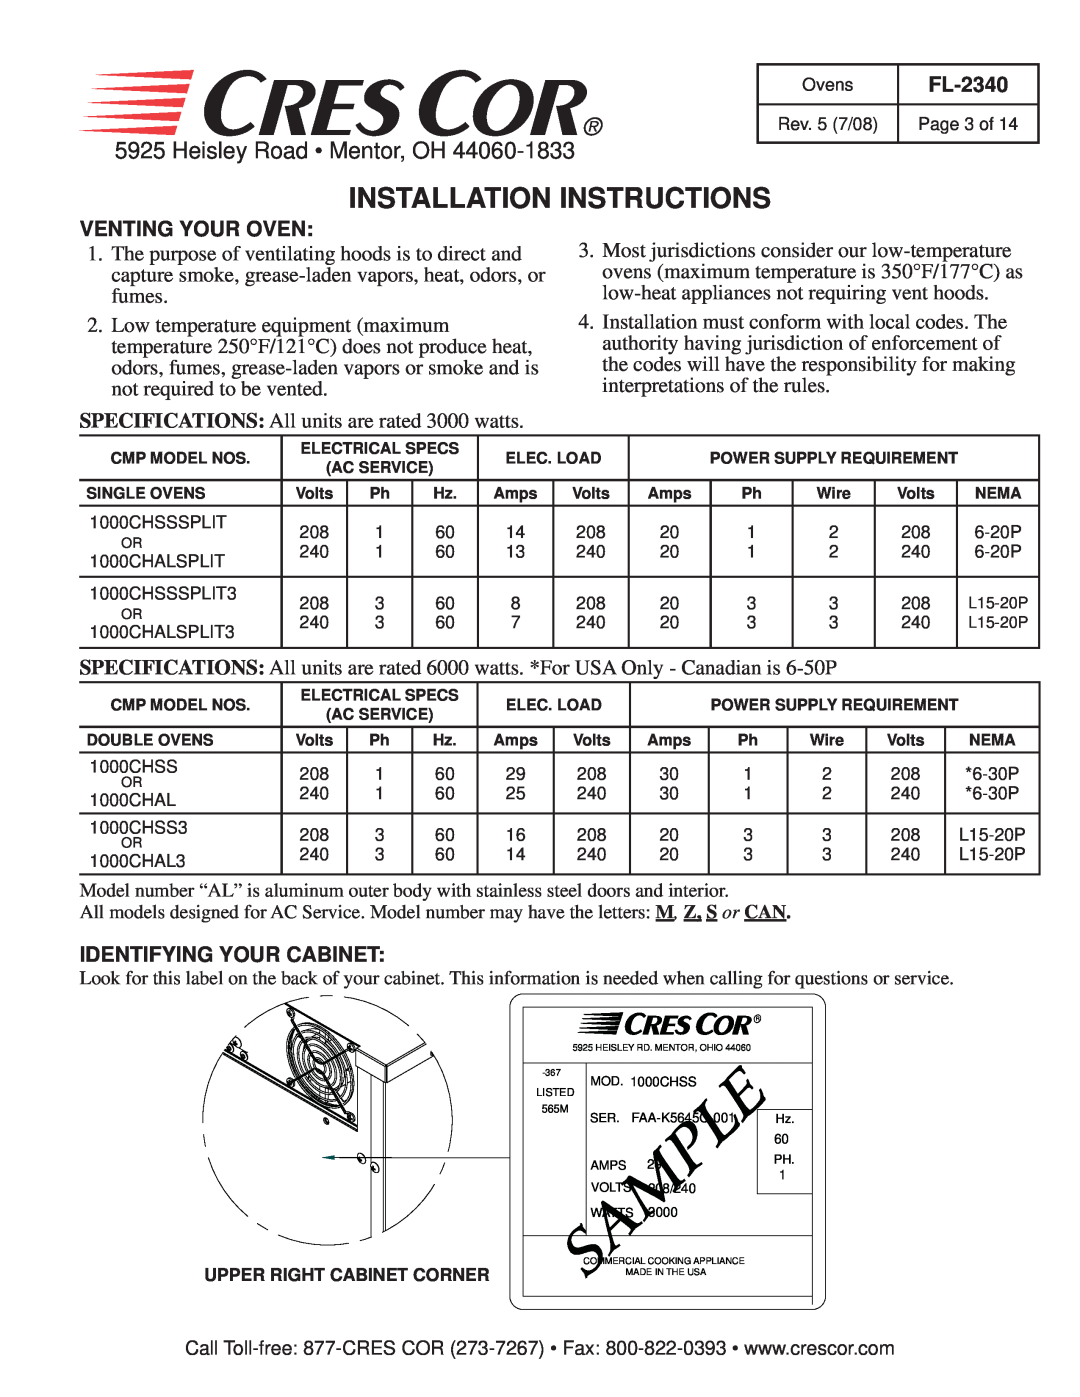 Cres Cor 1000-CH-SS-SPLIT Installation Instructions, Venting Your Oven, Identifying Your Cabinet, Heisley Road Mentor, OH 